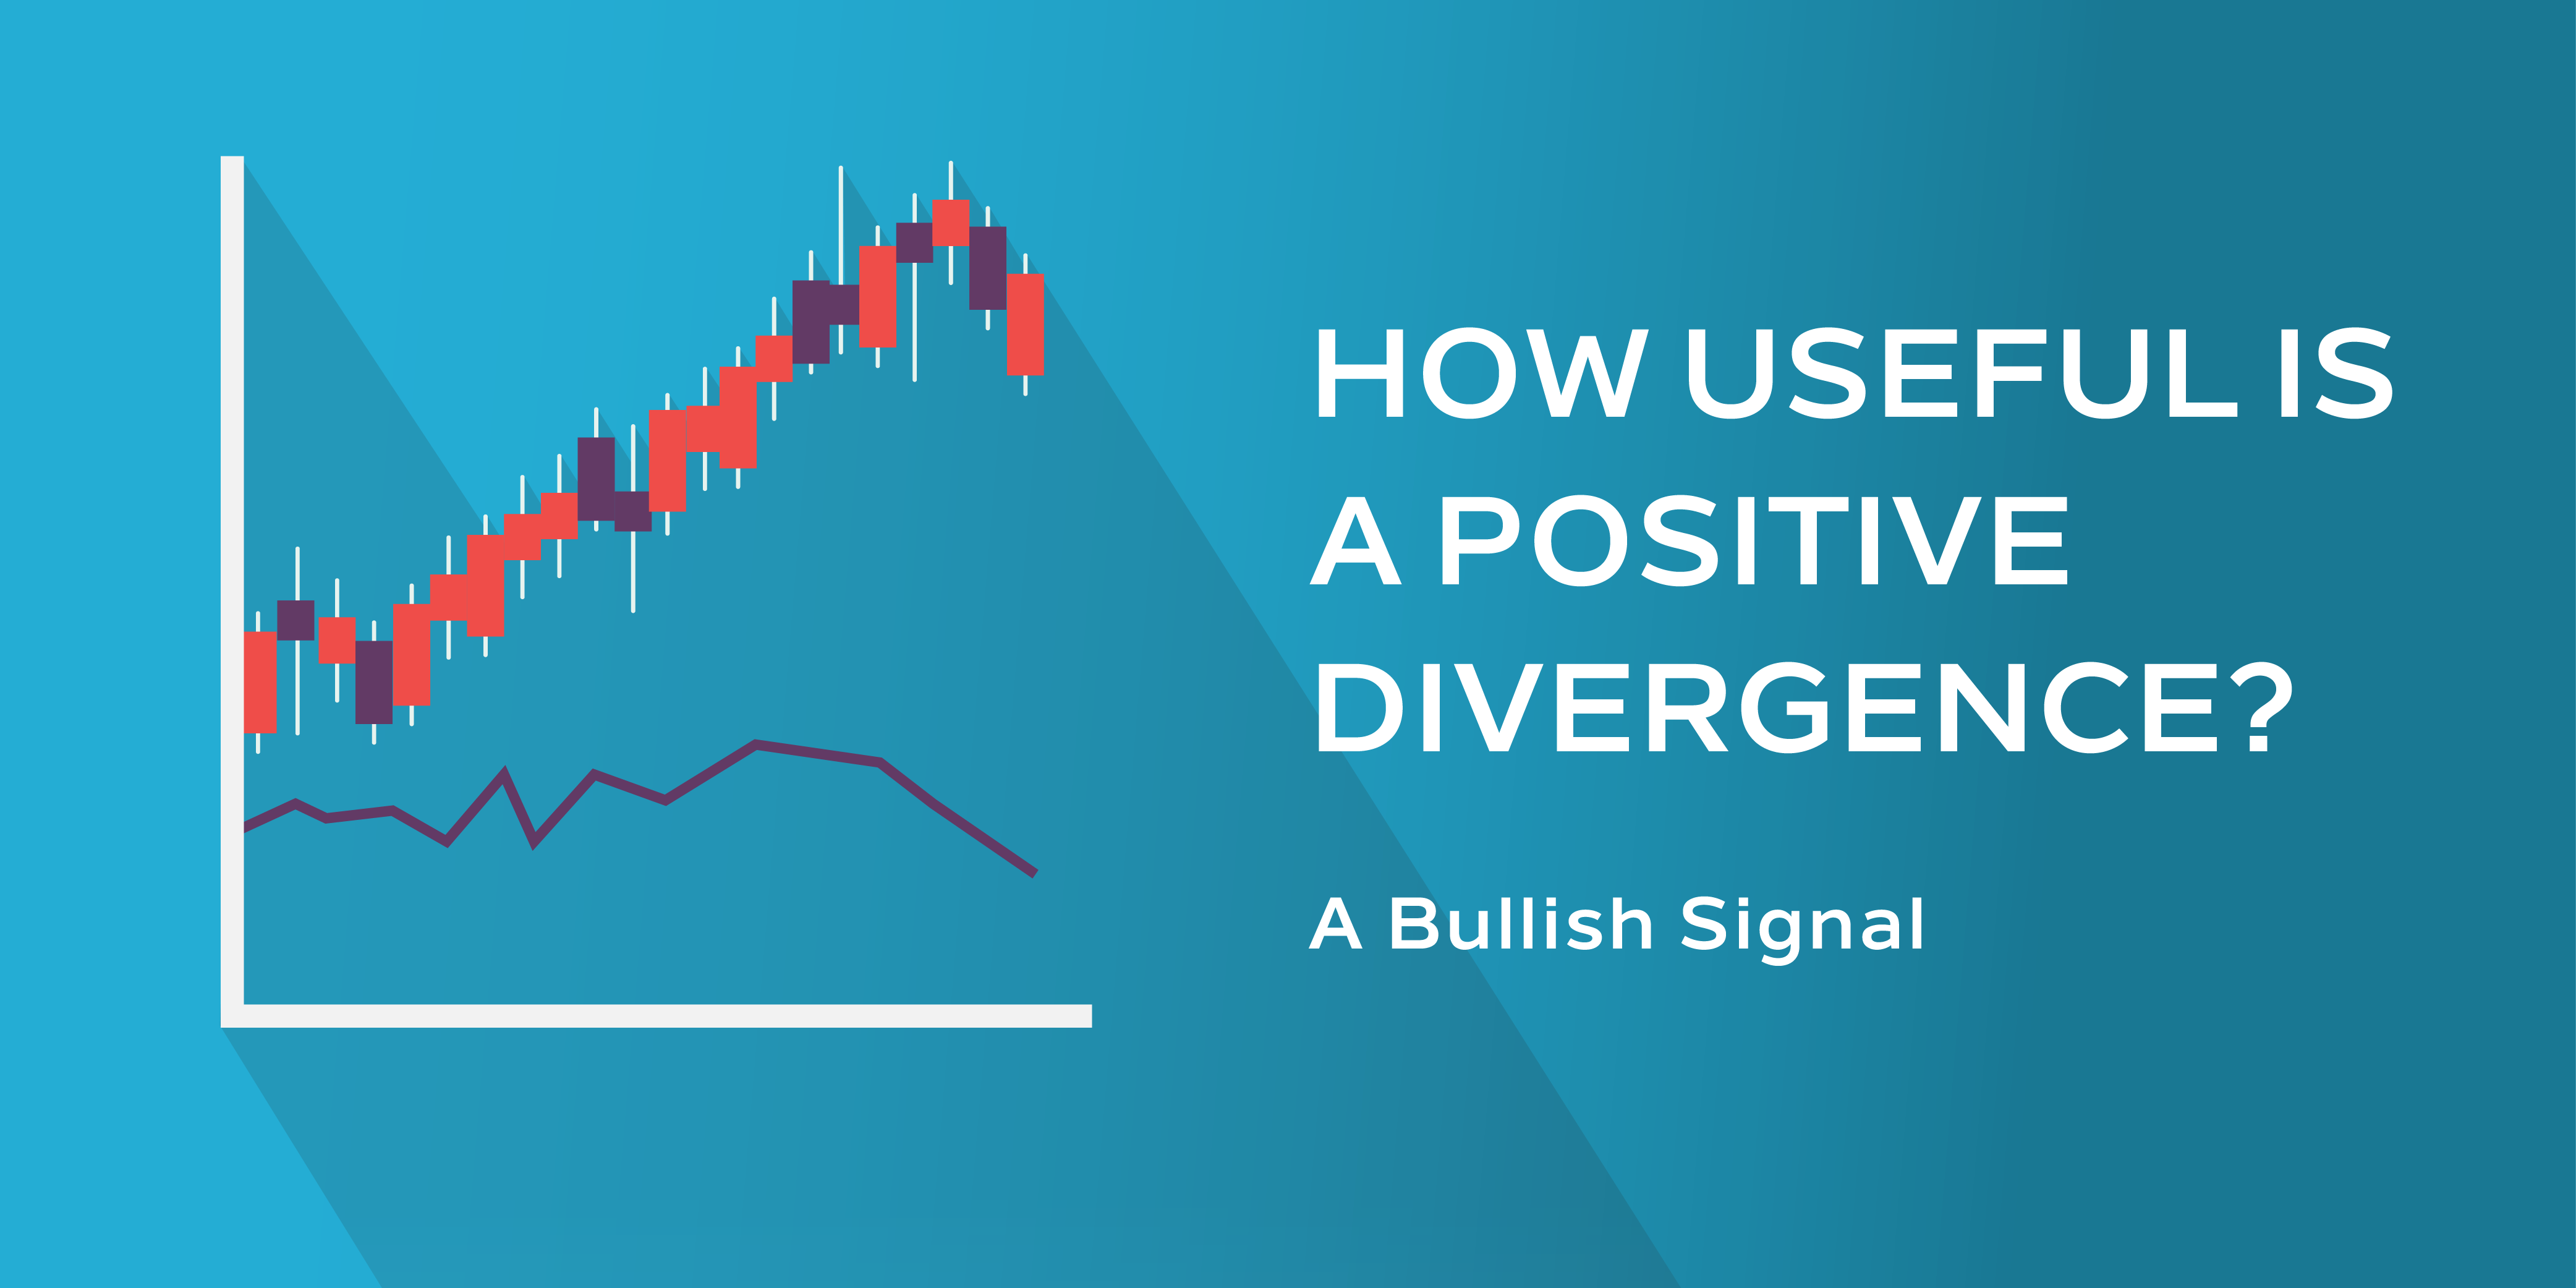 How Useful is a Positive Divergence?